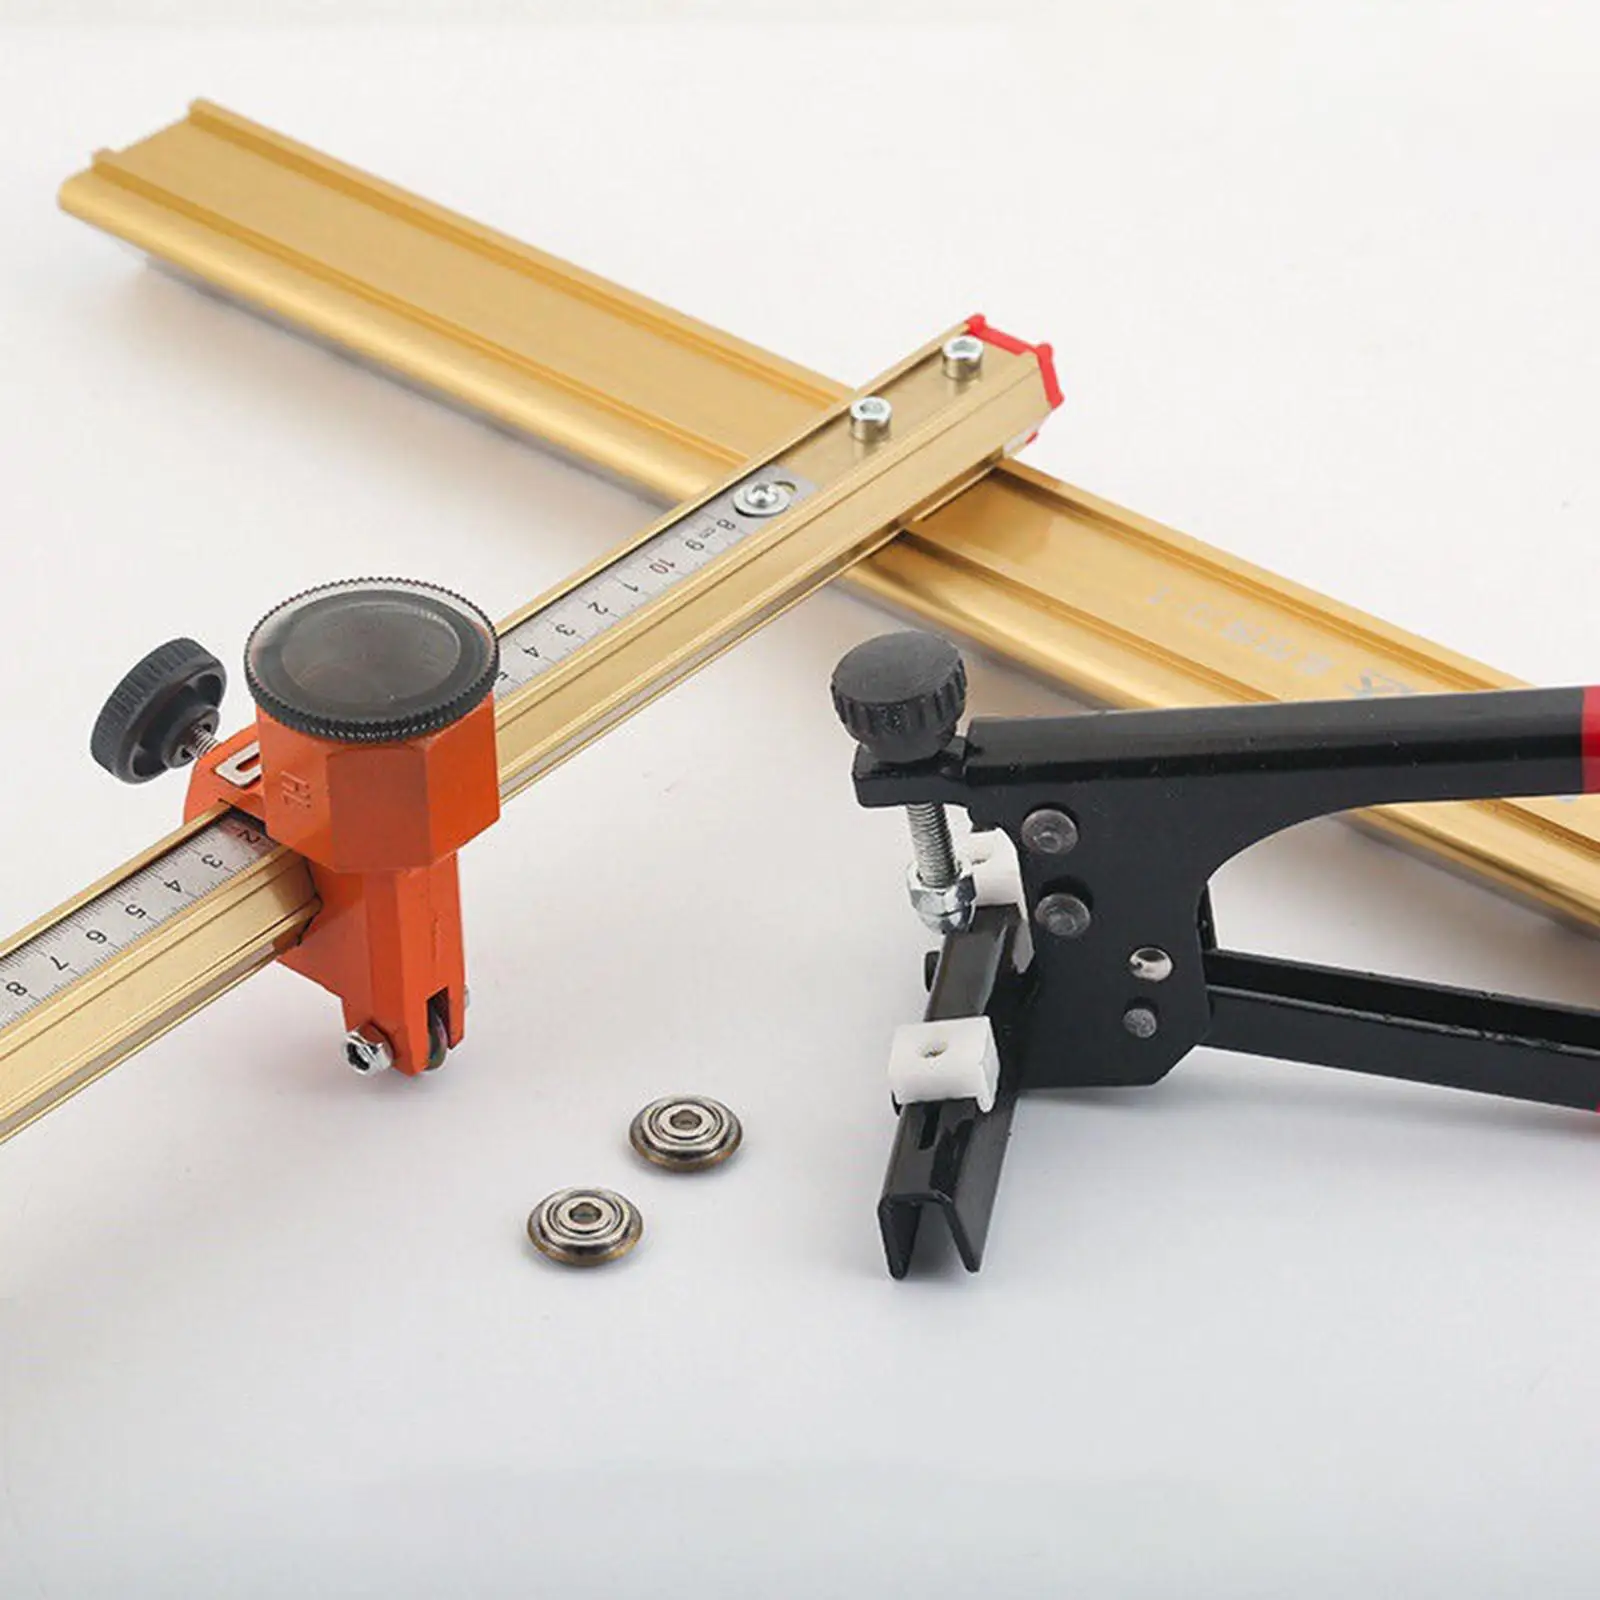 Glass Cutter Crafts DIY Project Self Controlled Oiling Glass Tile Cutter